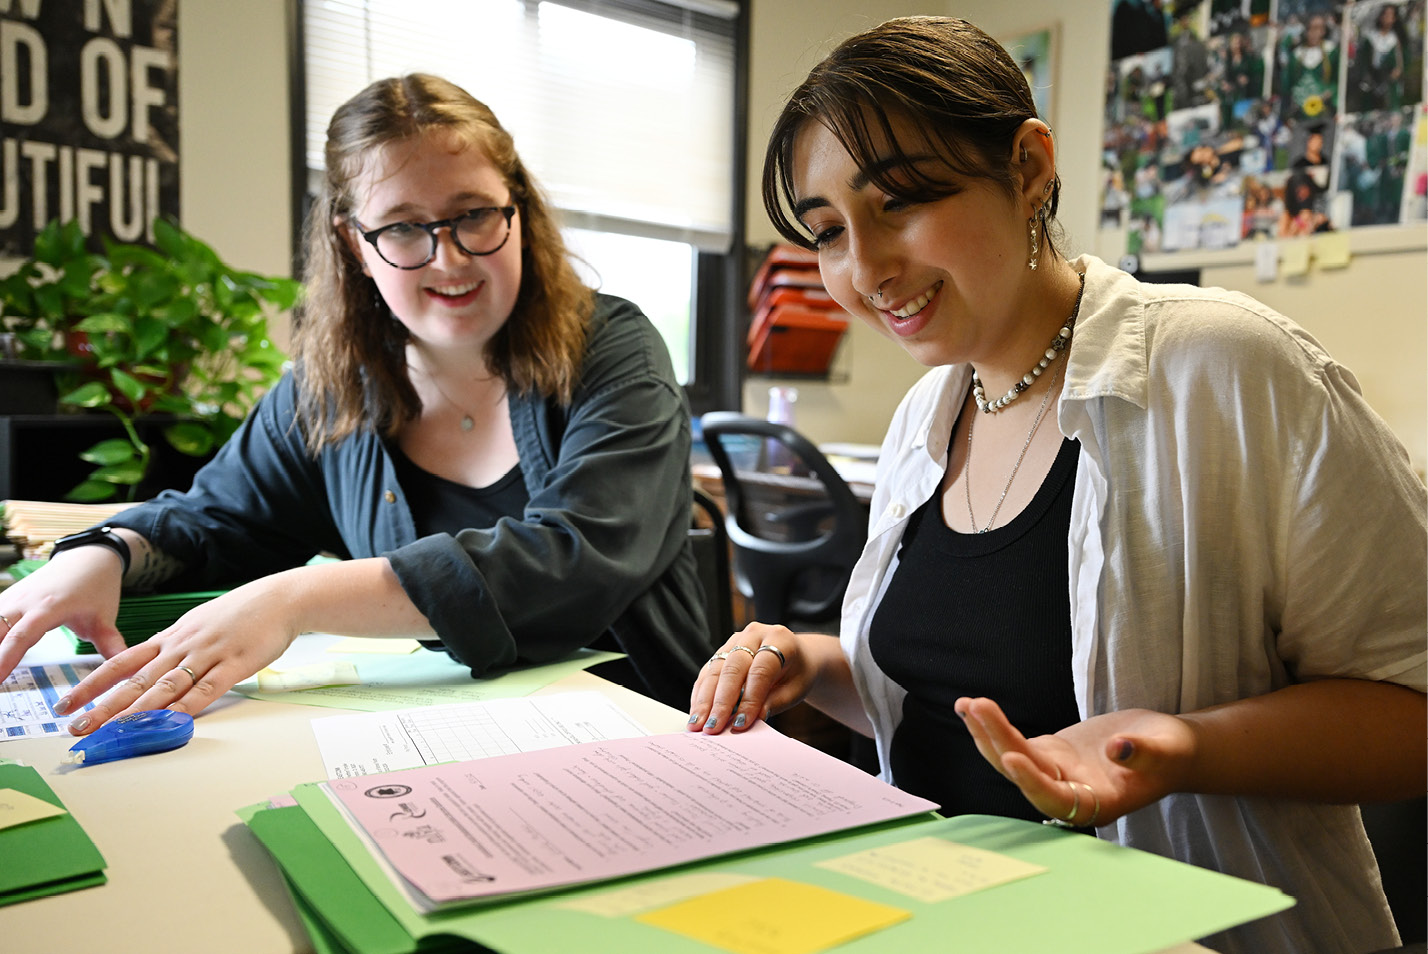 Civic Leaders Sarah Goodman Duffy ‘26 and Leila Merhi ‘25 review Teen Development and Employment Program applications at New London Youth Affairs, as they prepare to assemble orientation packets for summer employment youth in late June at the New London Youth Affairs office.